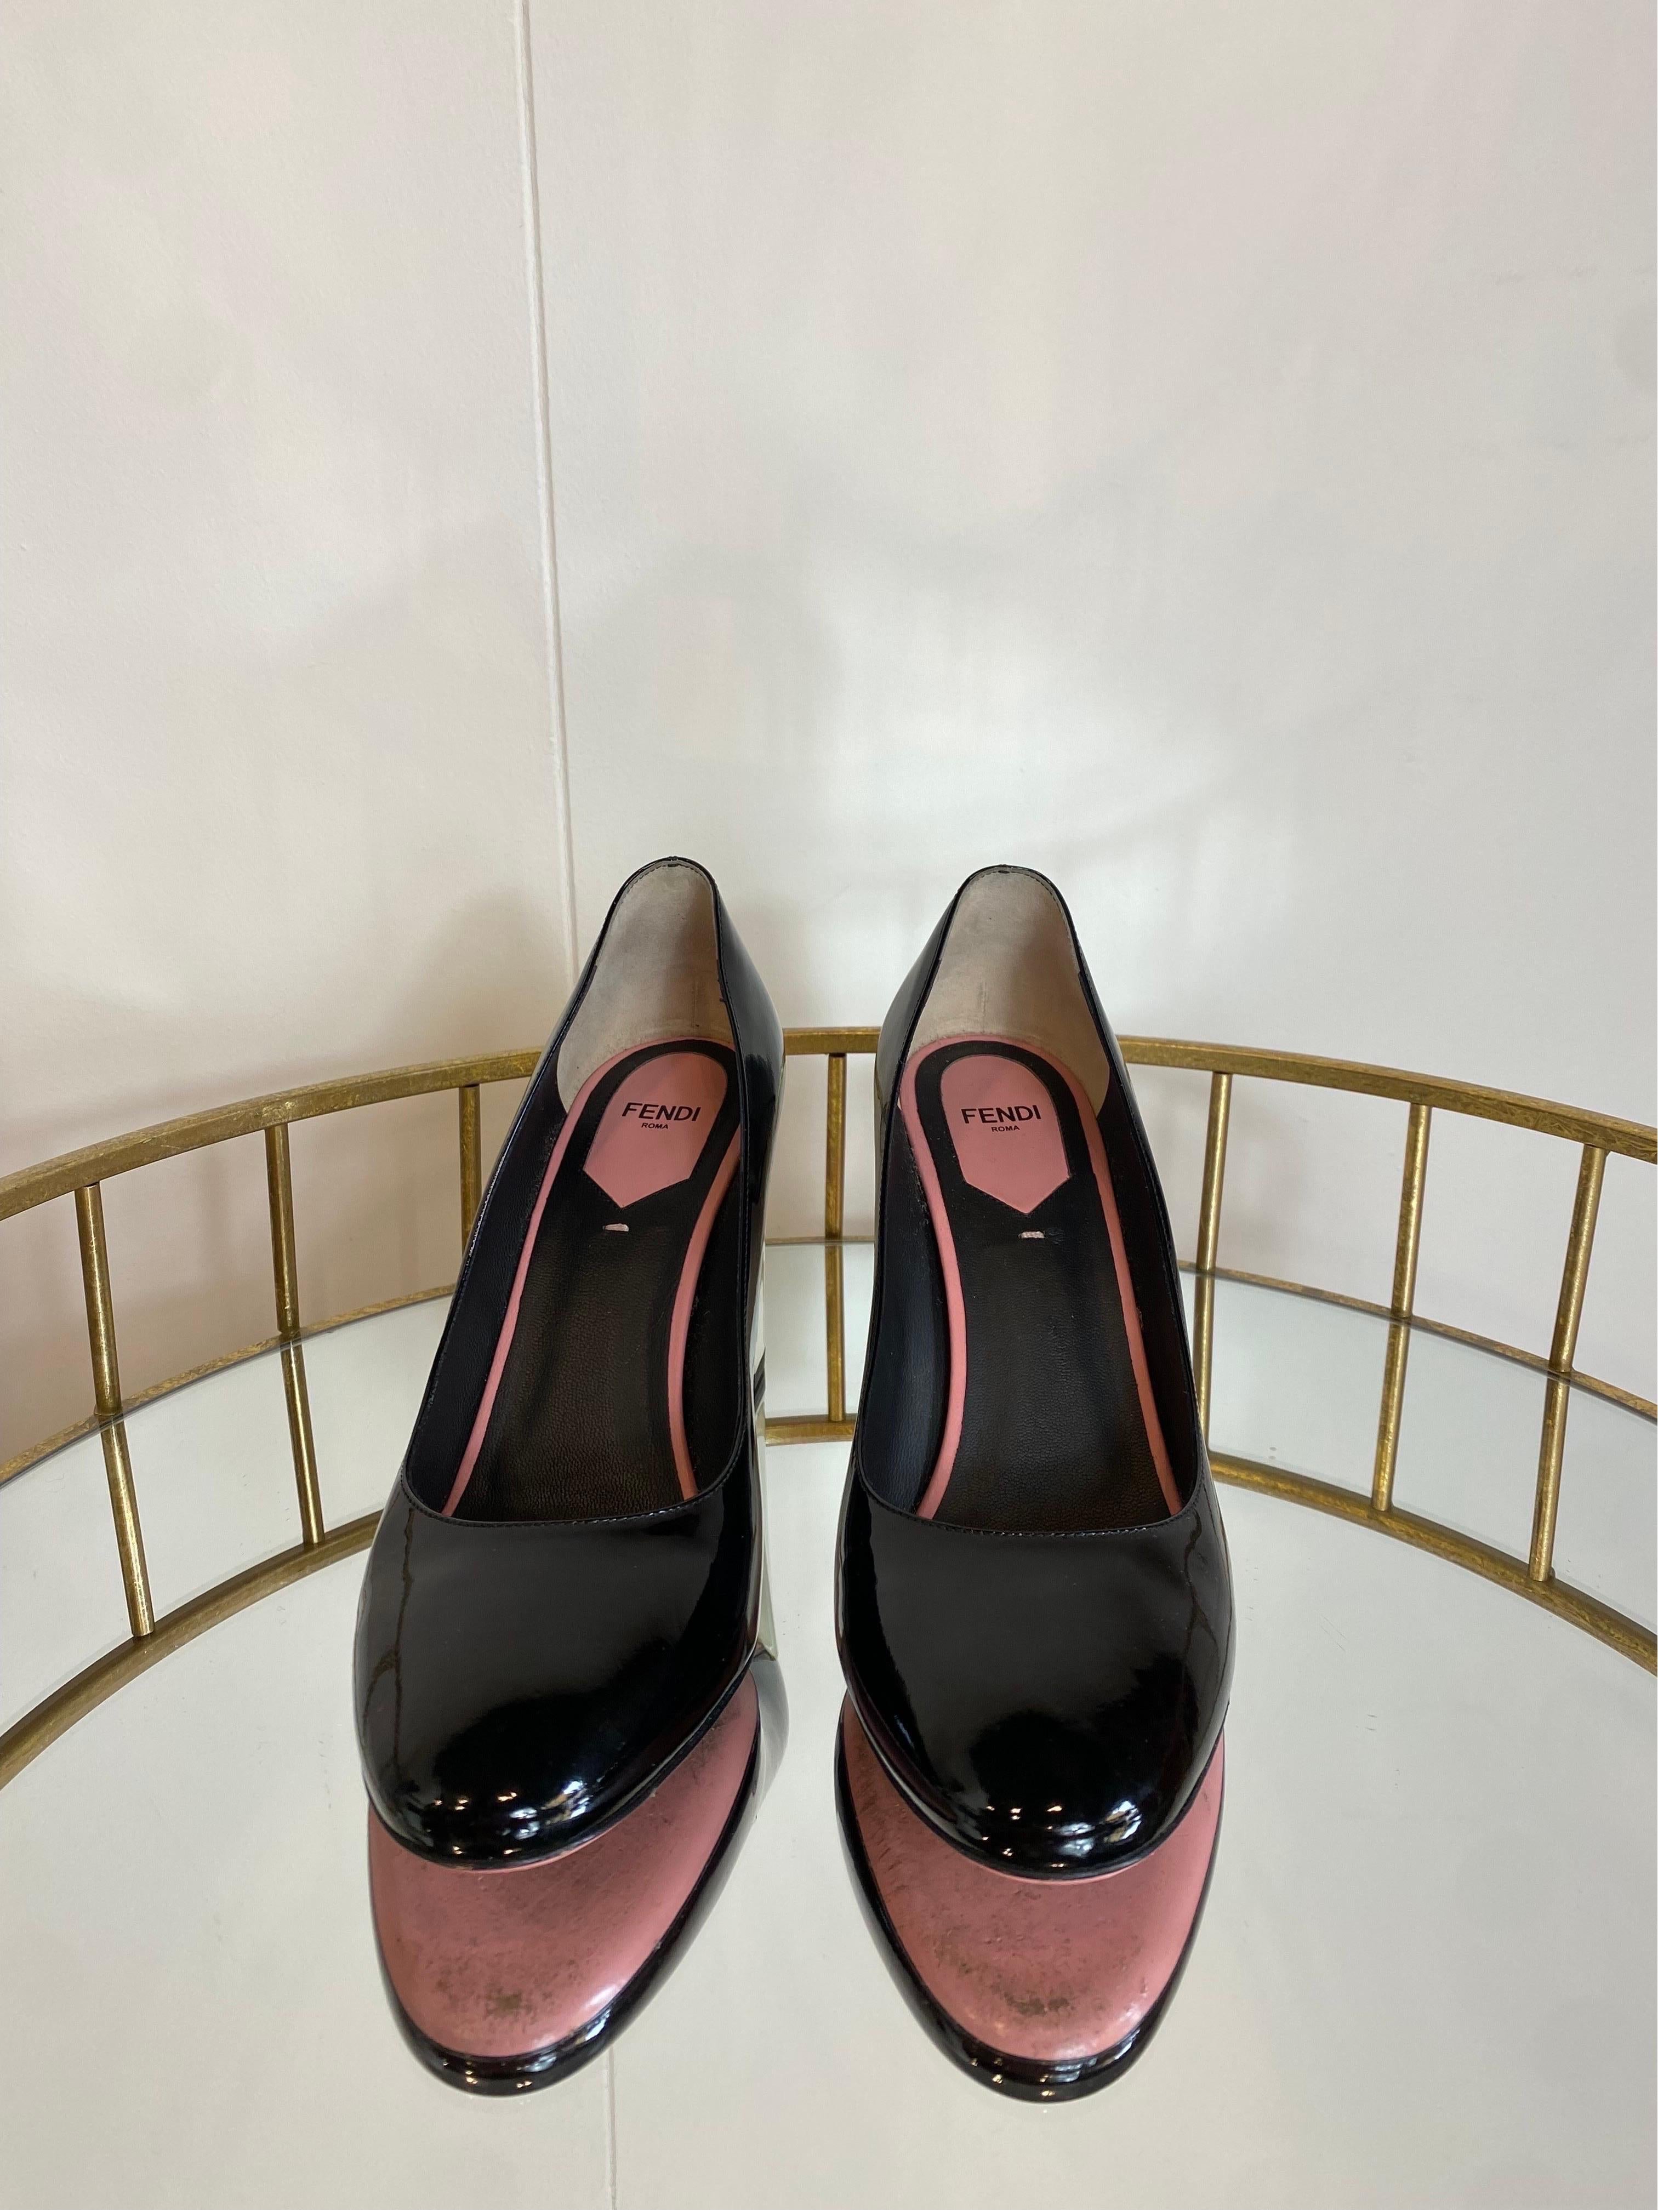 Fendi Black and White Pumps In Excellent Condition For Sale In Carnate, IT